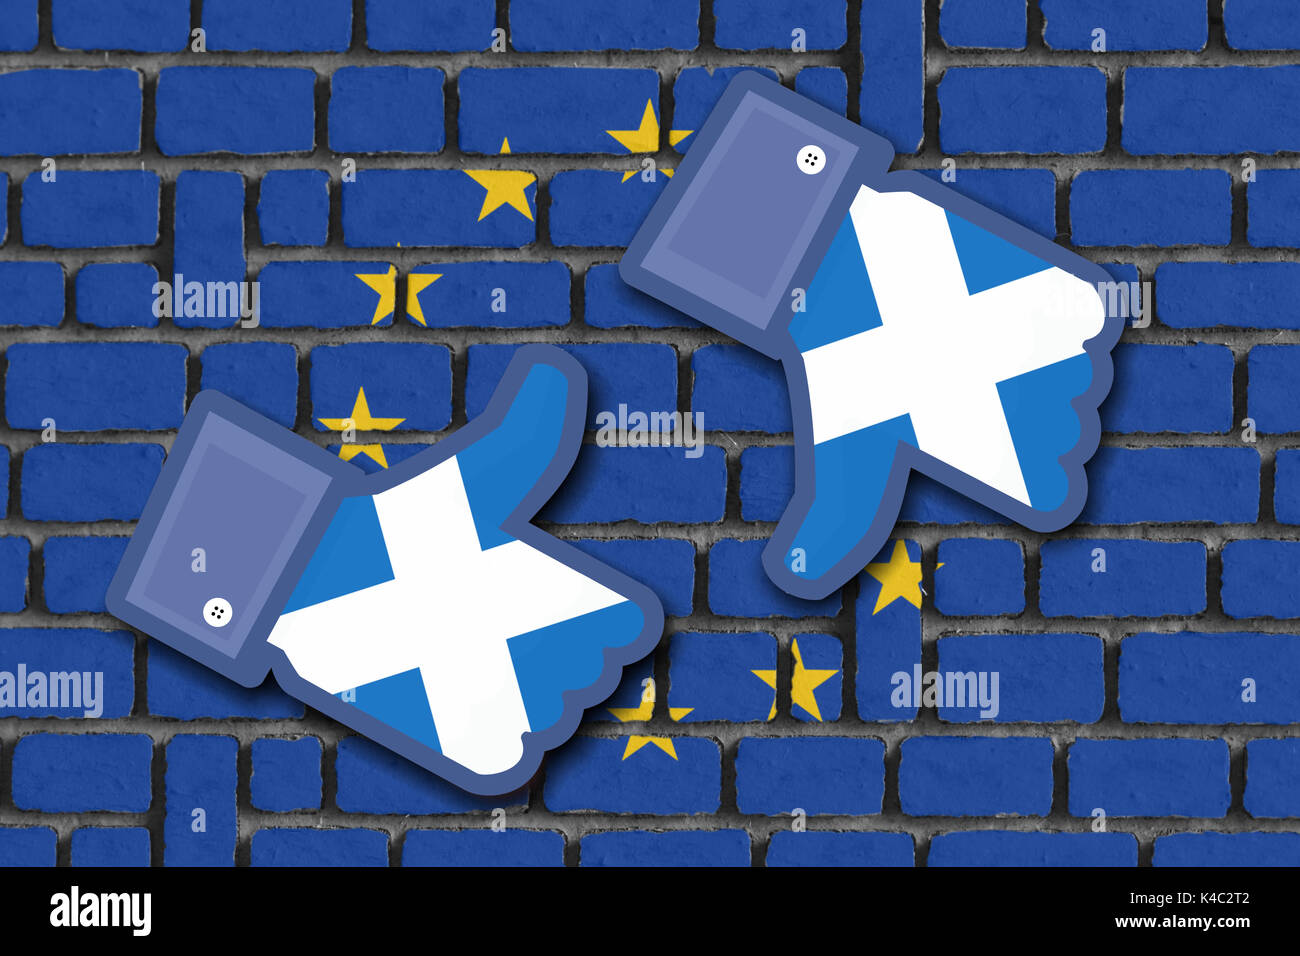 Wall With Flag Of Eu European Union And Facebook Like And Dislike Icons With Flag Of Scotland Stock Photo